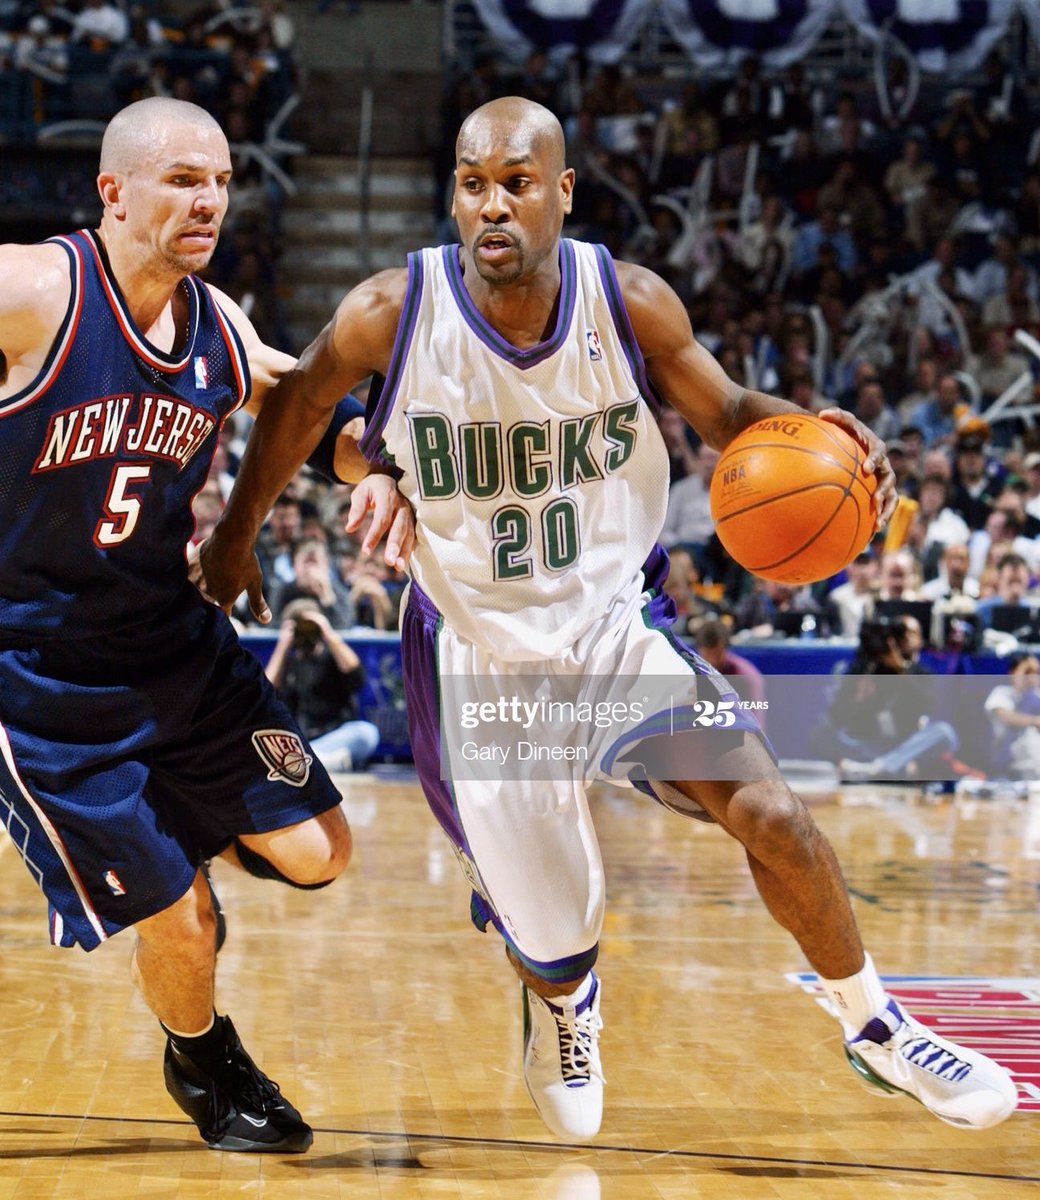 When I think of Gary Payton’s career, I tend to forget about the 34 games he played for the Milwaukee Bucks.